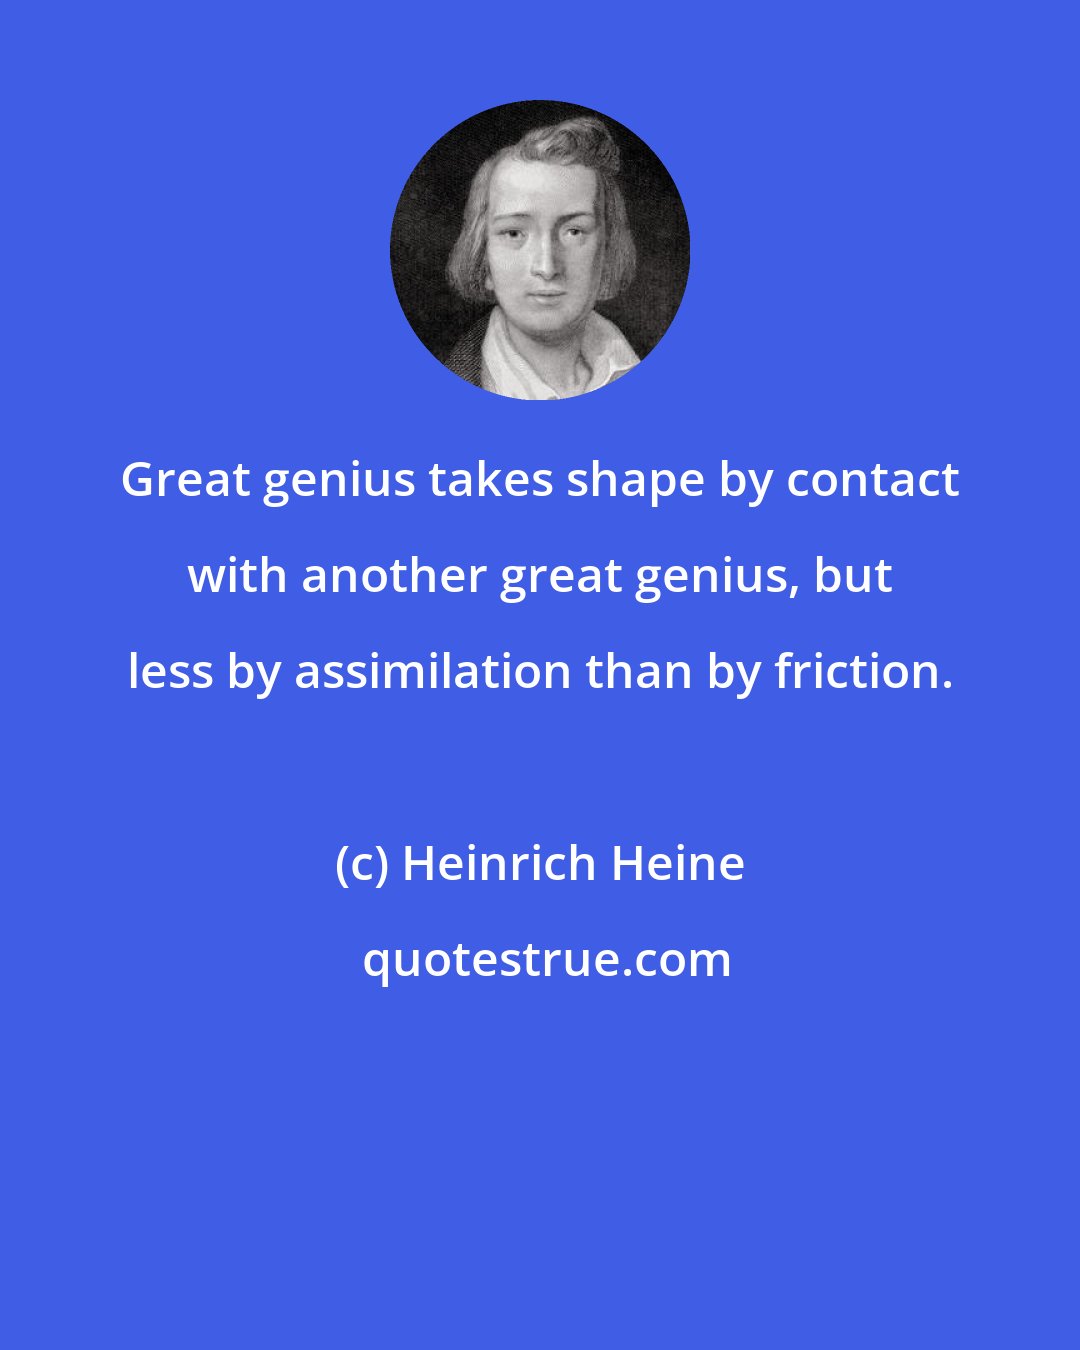 Heinrich Heine: Great genius takes shape by contact with another great genius, but less by assimilation than by friction.